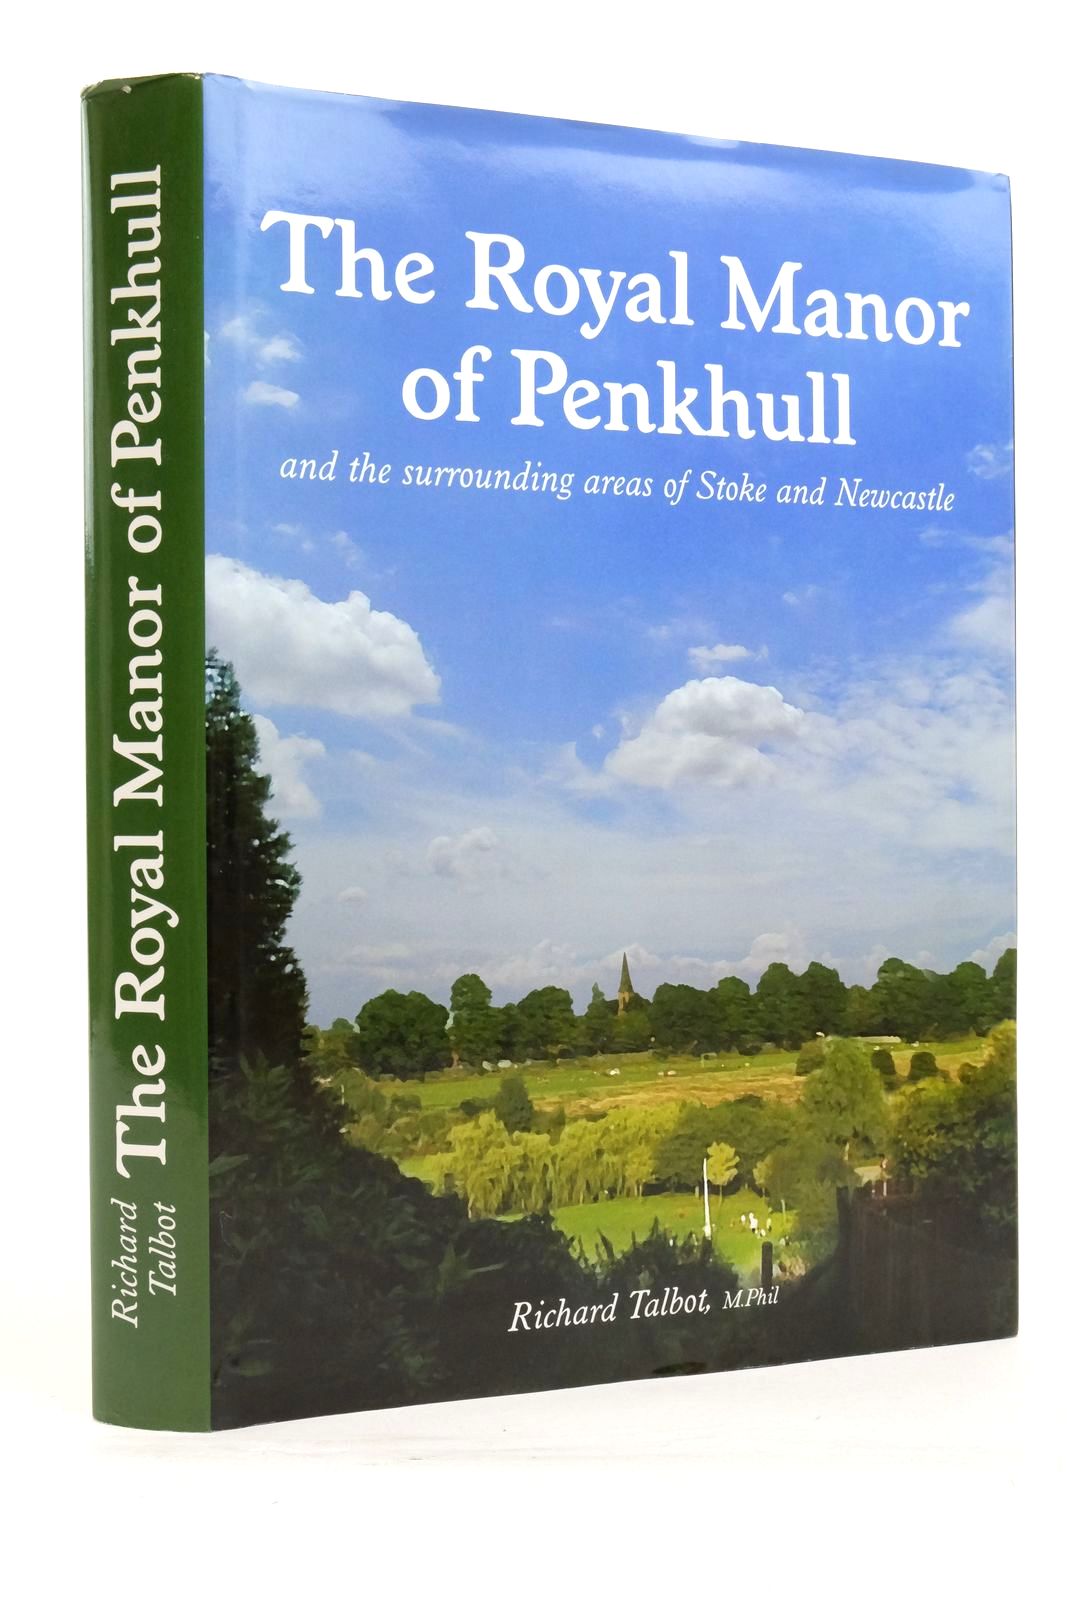 Photo of THE ROYAL MANOR OF PENKHULL AND THE SURROUNDING AREAS OF STOKE AND NEWCASTLE written by Talbot, Richard published by The Talbot Press (STOCK CODE: 2137989)  for sale by Stella & Rose's Books